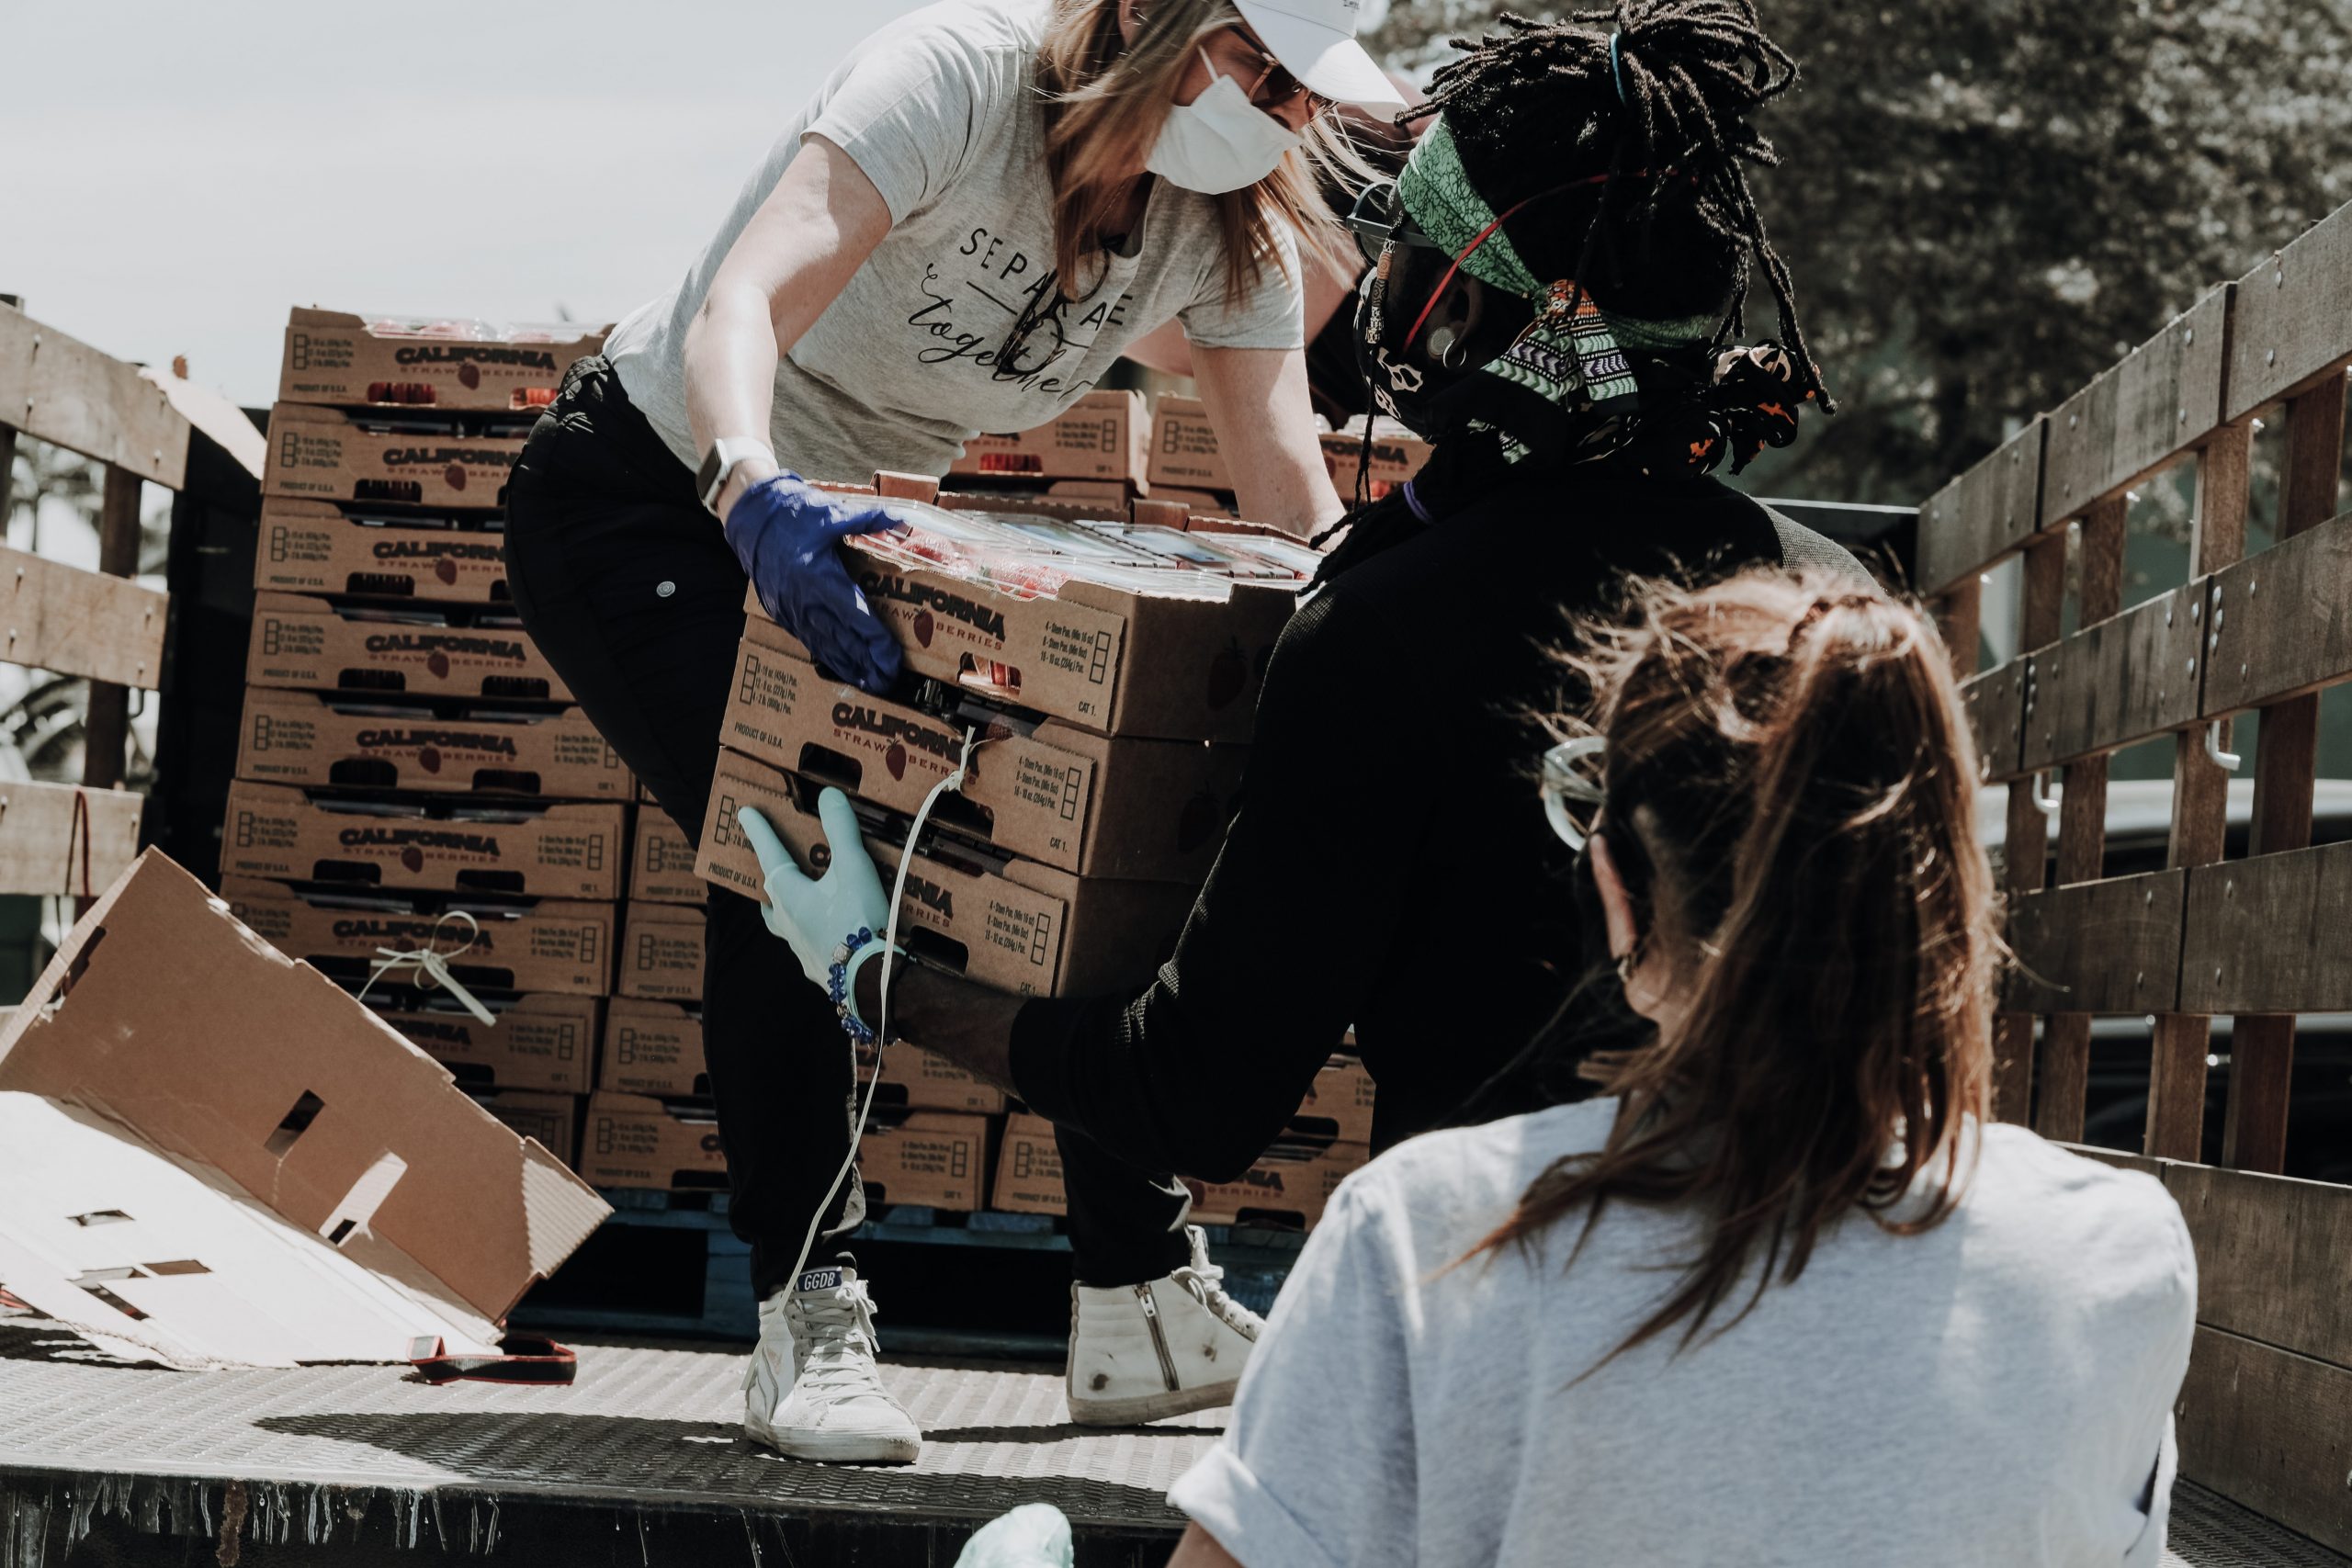 Three volunteers wearing face masks unload crates of strawberries off of a truck